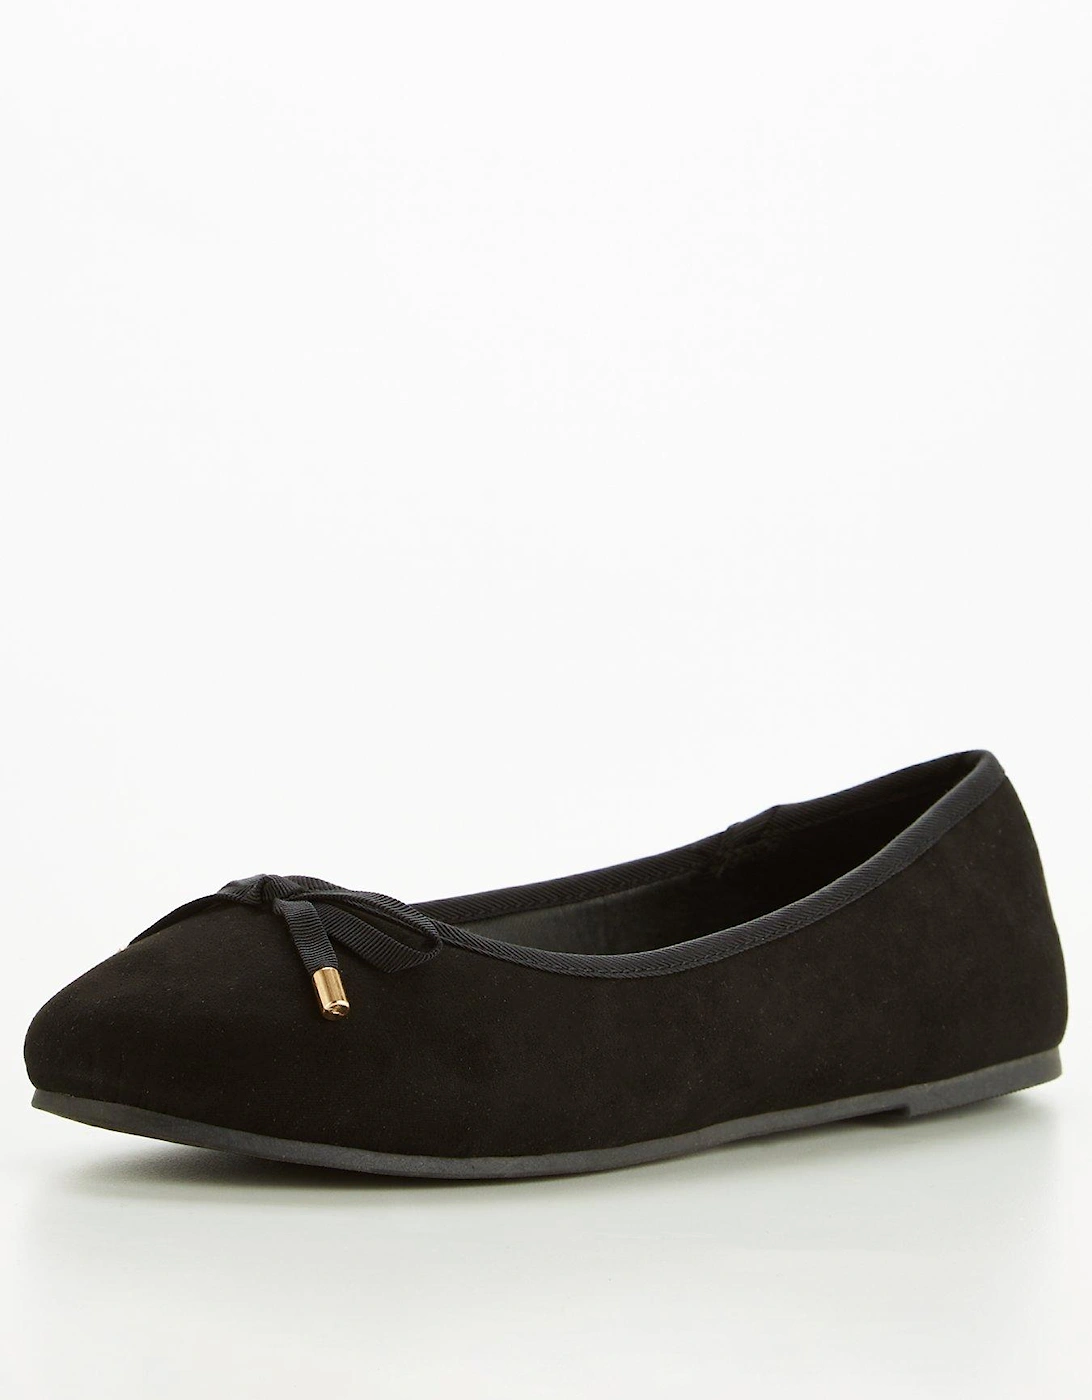 Wide Fit Round Toe Ballerina - Black, 7 of 6